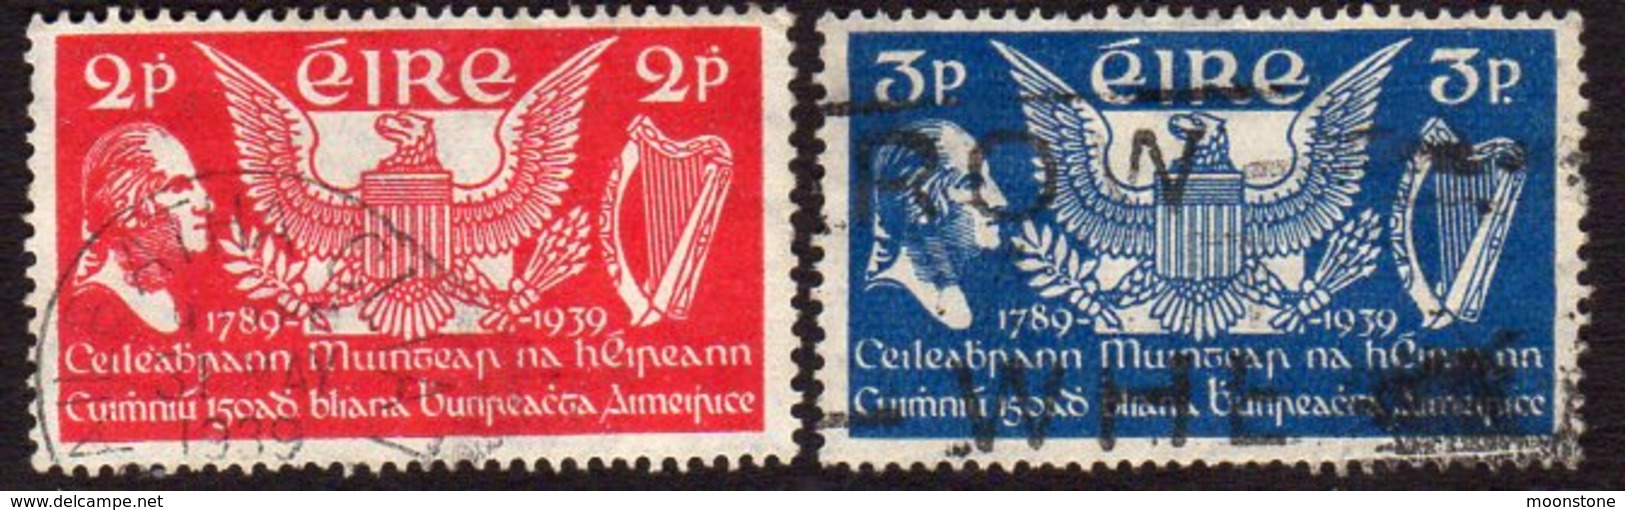 Ireland 1939 150th Anniversary Of US Constitution Set Of 2,used, SG 109/10 - Unused Stamps